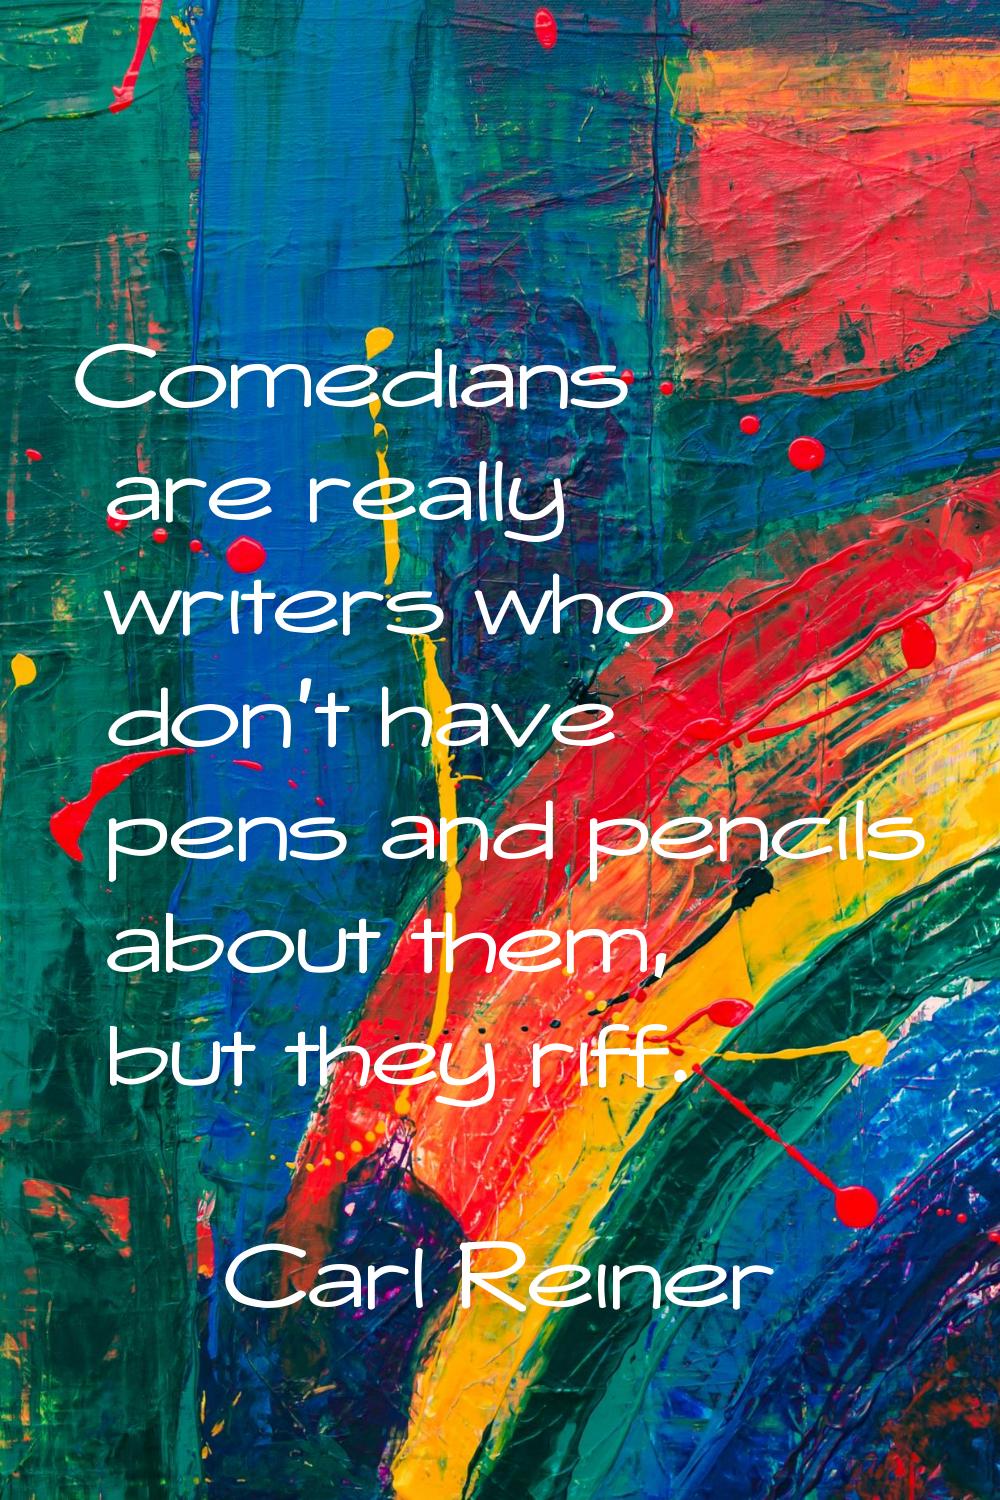 Comedians are really writers who don't have pens and pencils about them, but they riff.